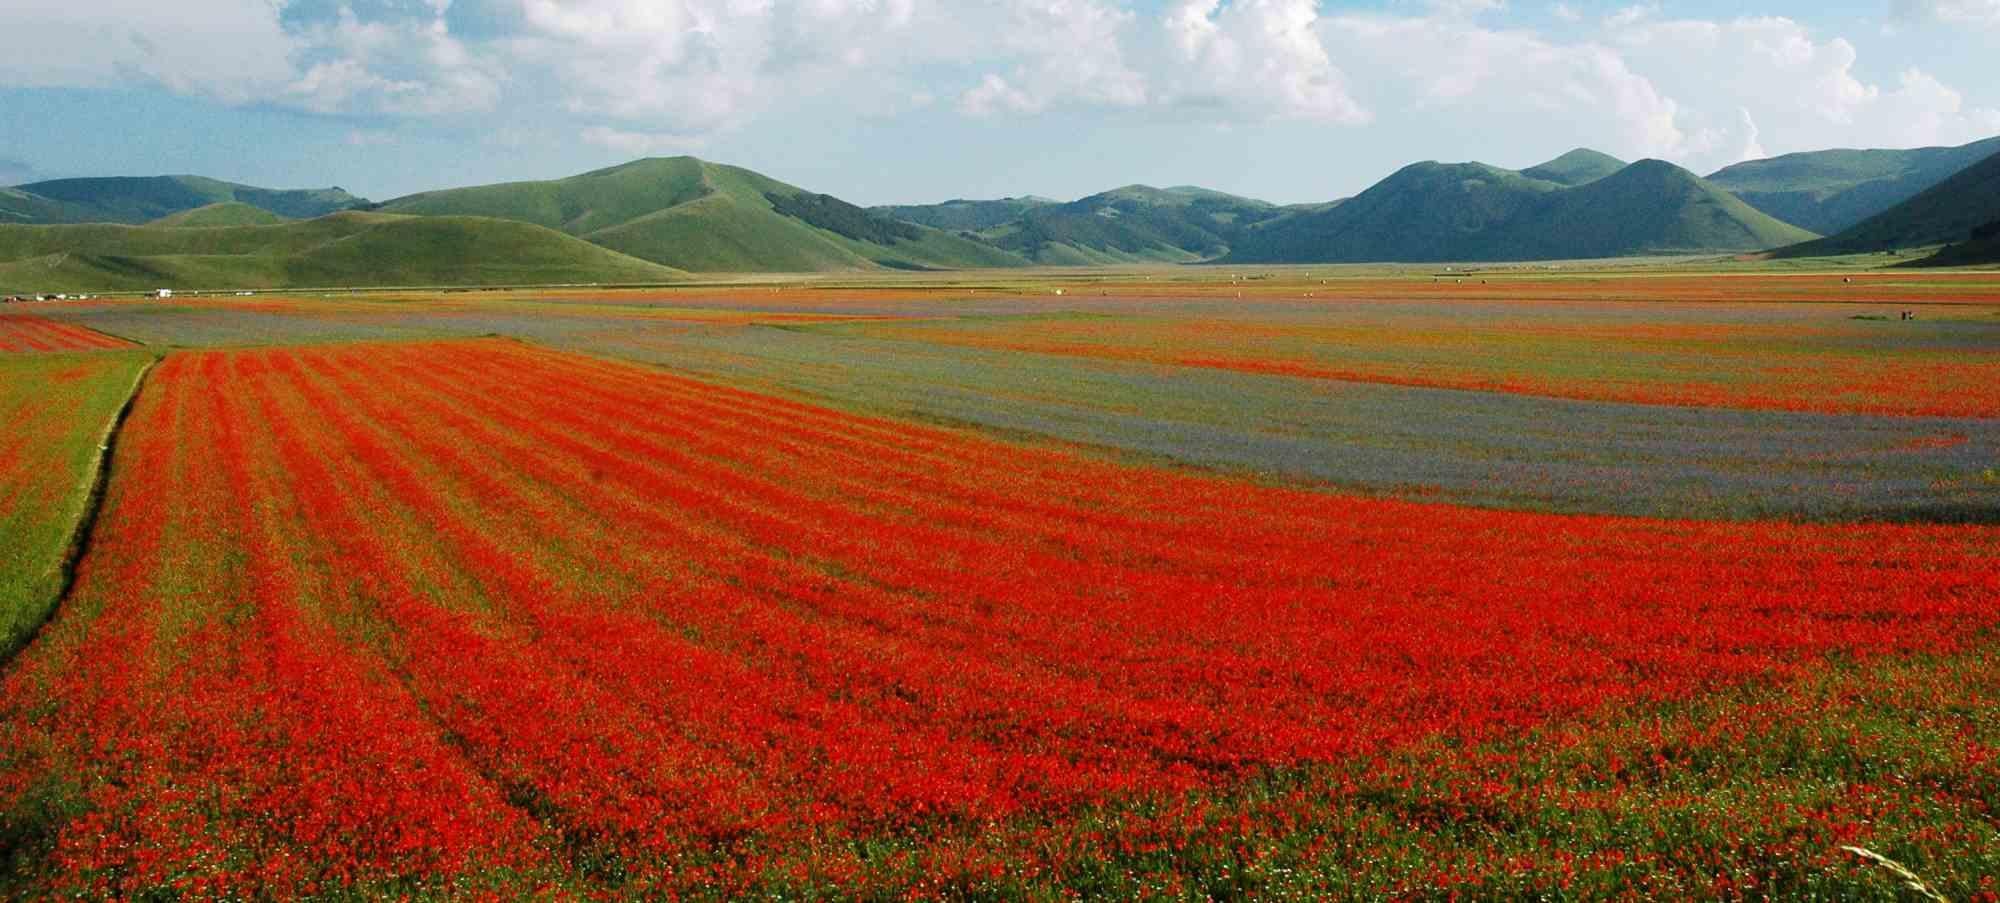 Red Stripes is one of the best photo on canvas realized by Giuseppe Marani in 2010.

Always passionate about landscapes and photography, the artist then devoted himself to landscaping. He greatly admires the beauty of the landscapes of Castelluccio